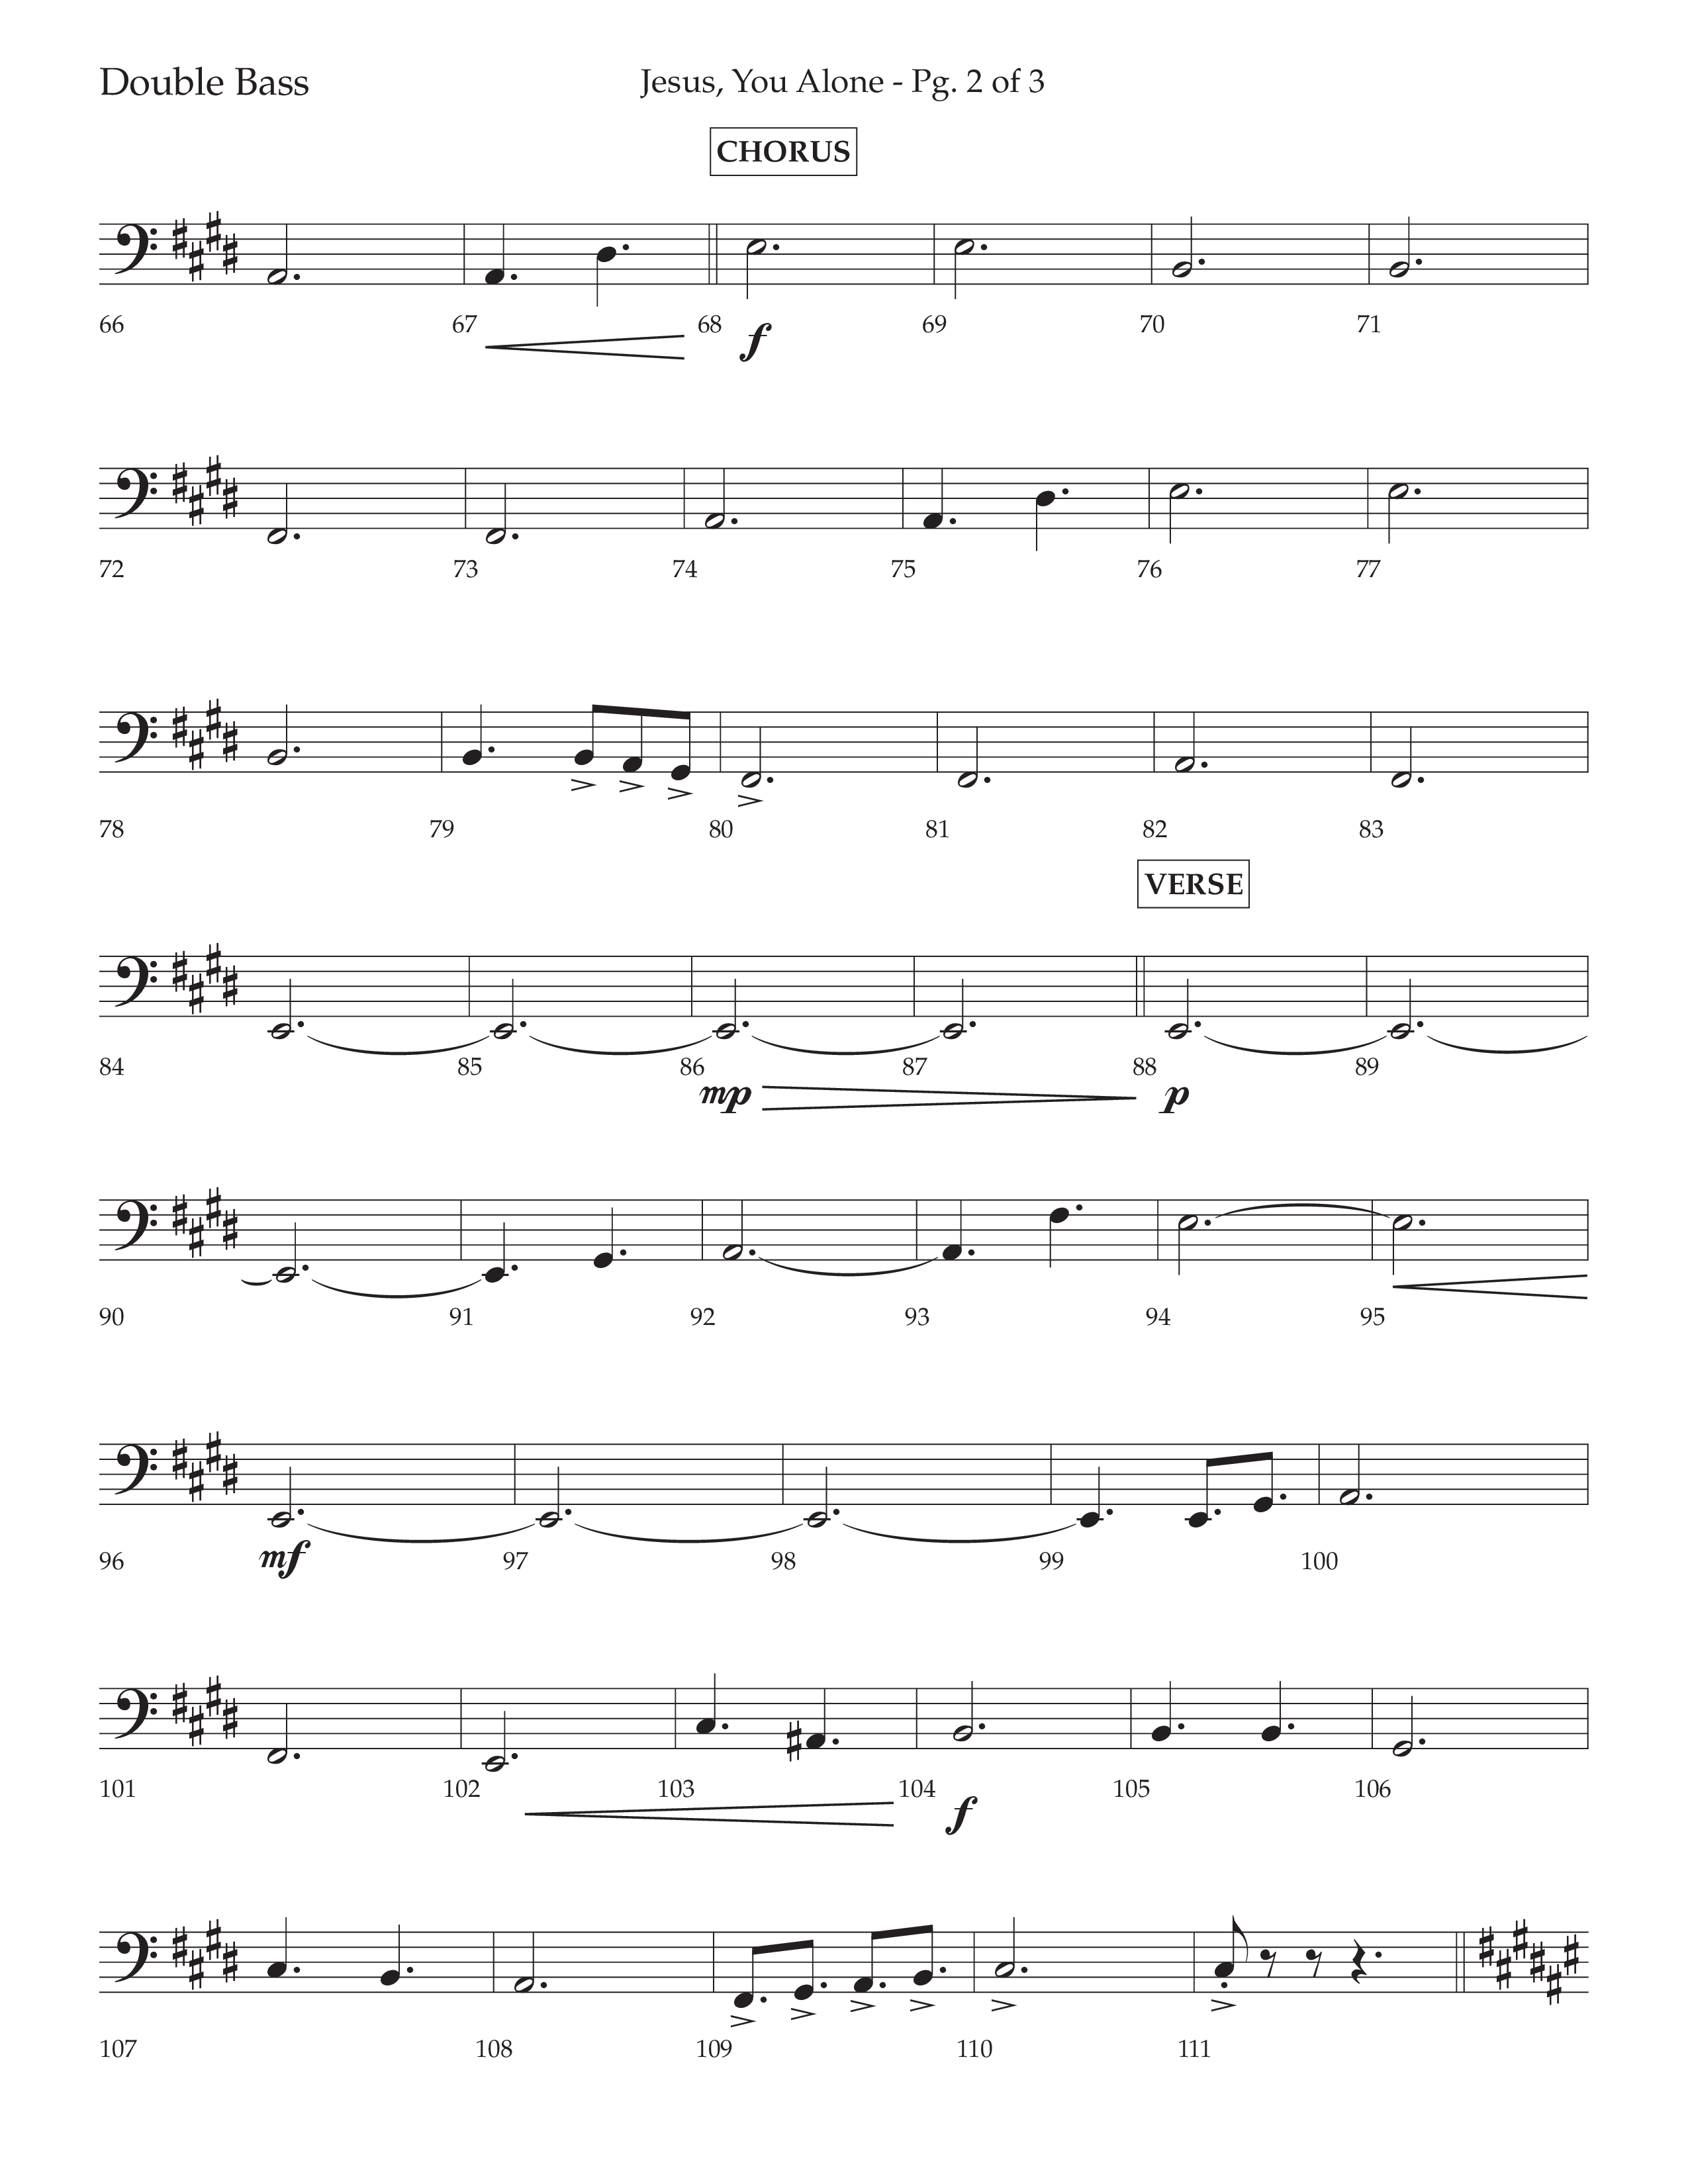 Jesus You Alone (Choral Anthem SATB) Double Bass (Lifeway Choral / Arr. David Wise / Orch. Bradley Knight)